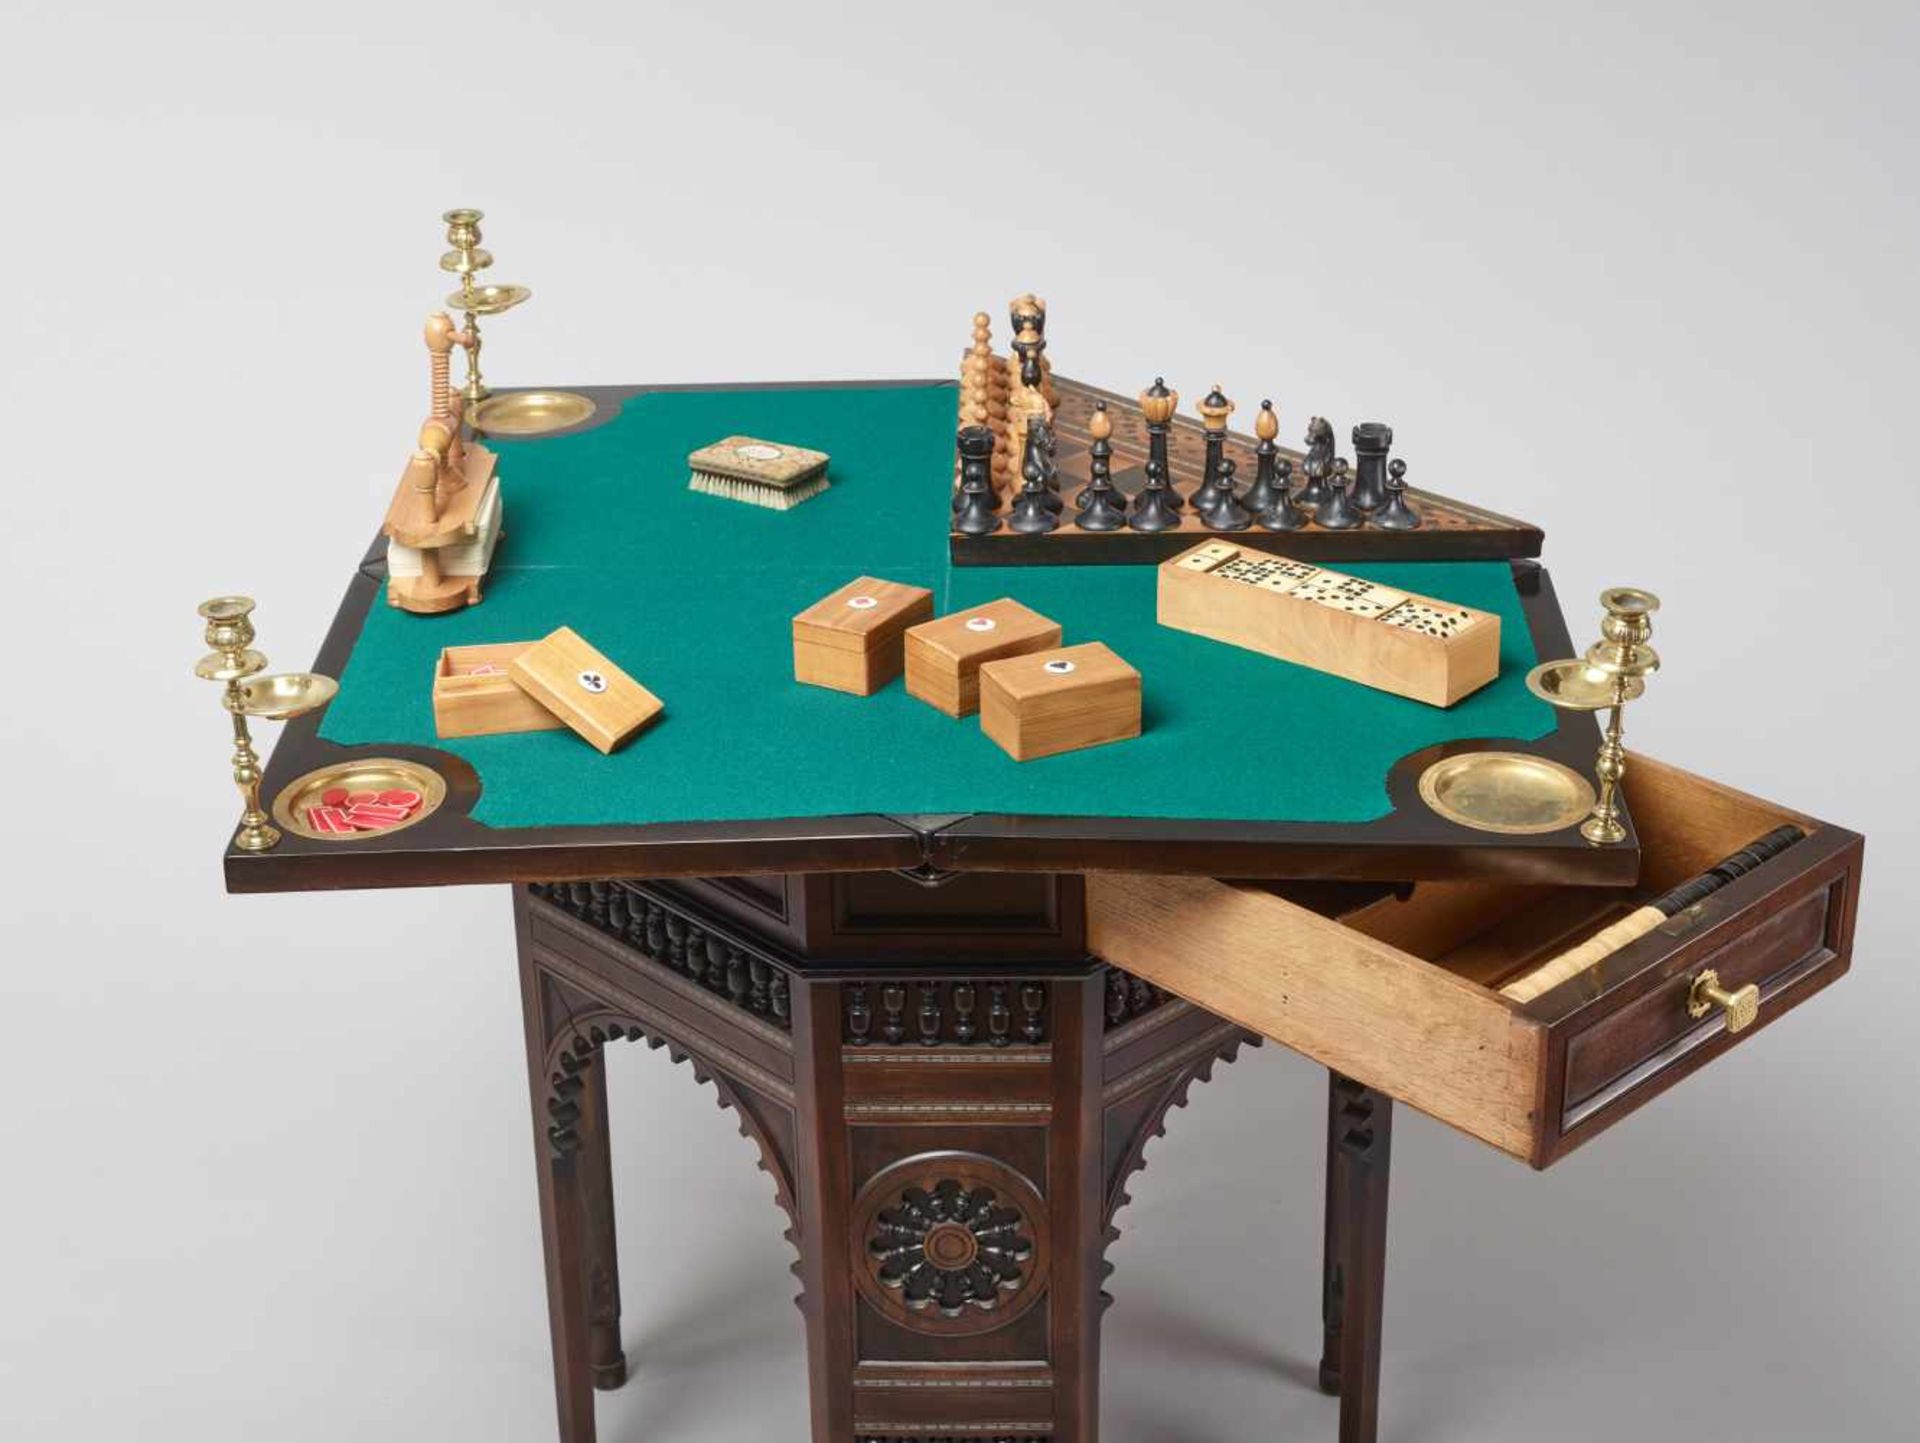 A VERY RARE CARD AND CHESS GAMES TABLE IN ORIENTAL STYLE, VIENNA 1880sWood with marquetry work, - Image 11 of 18